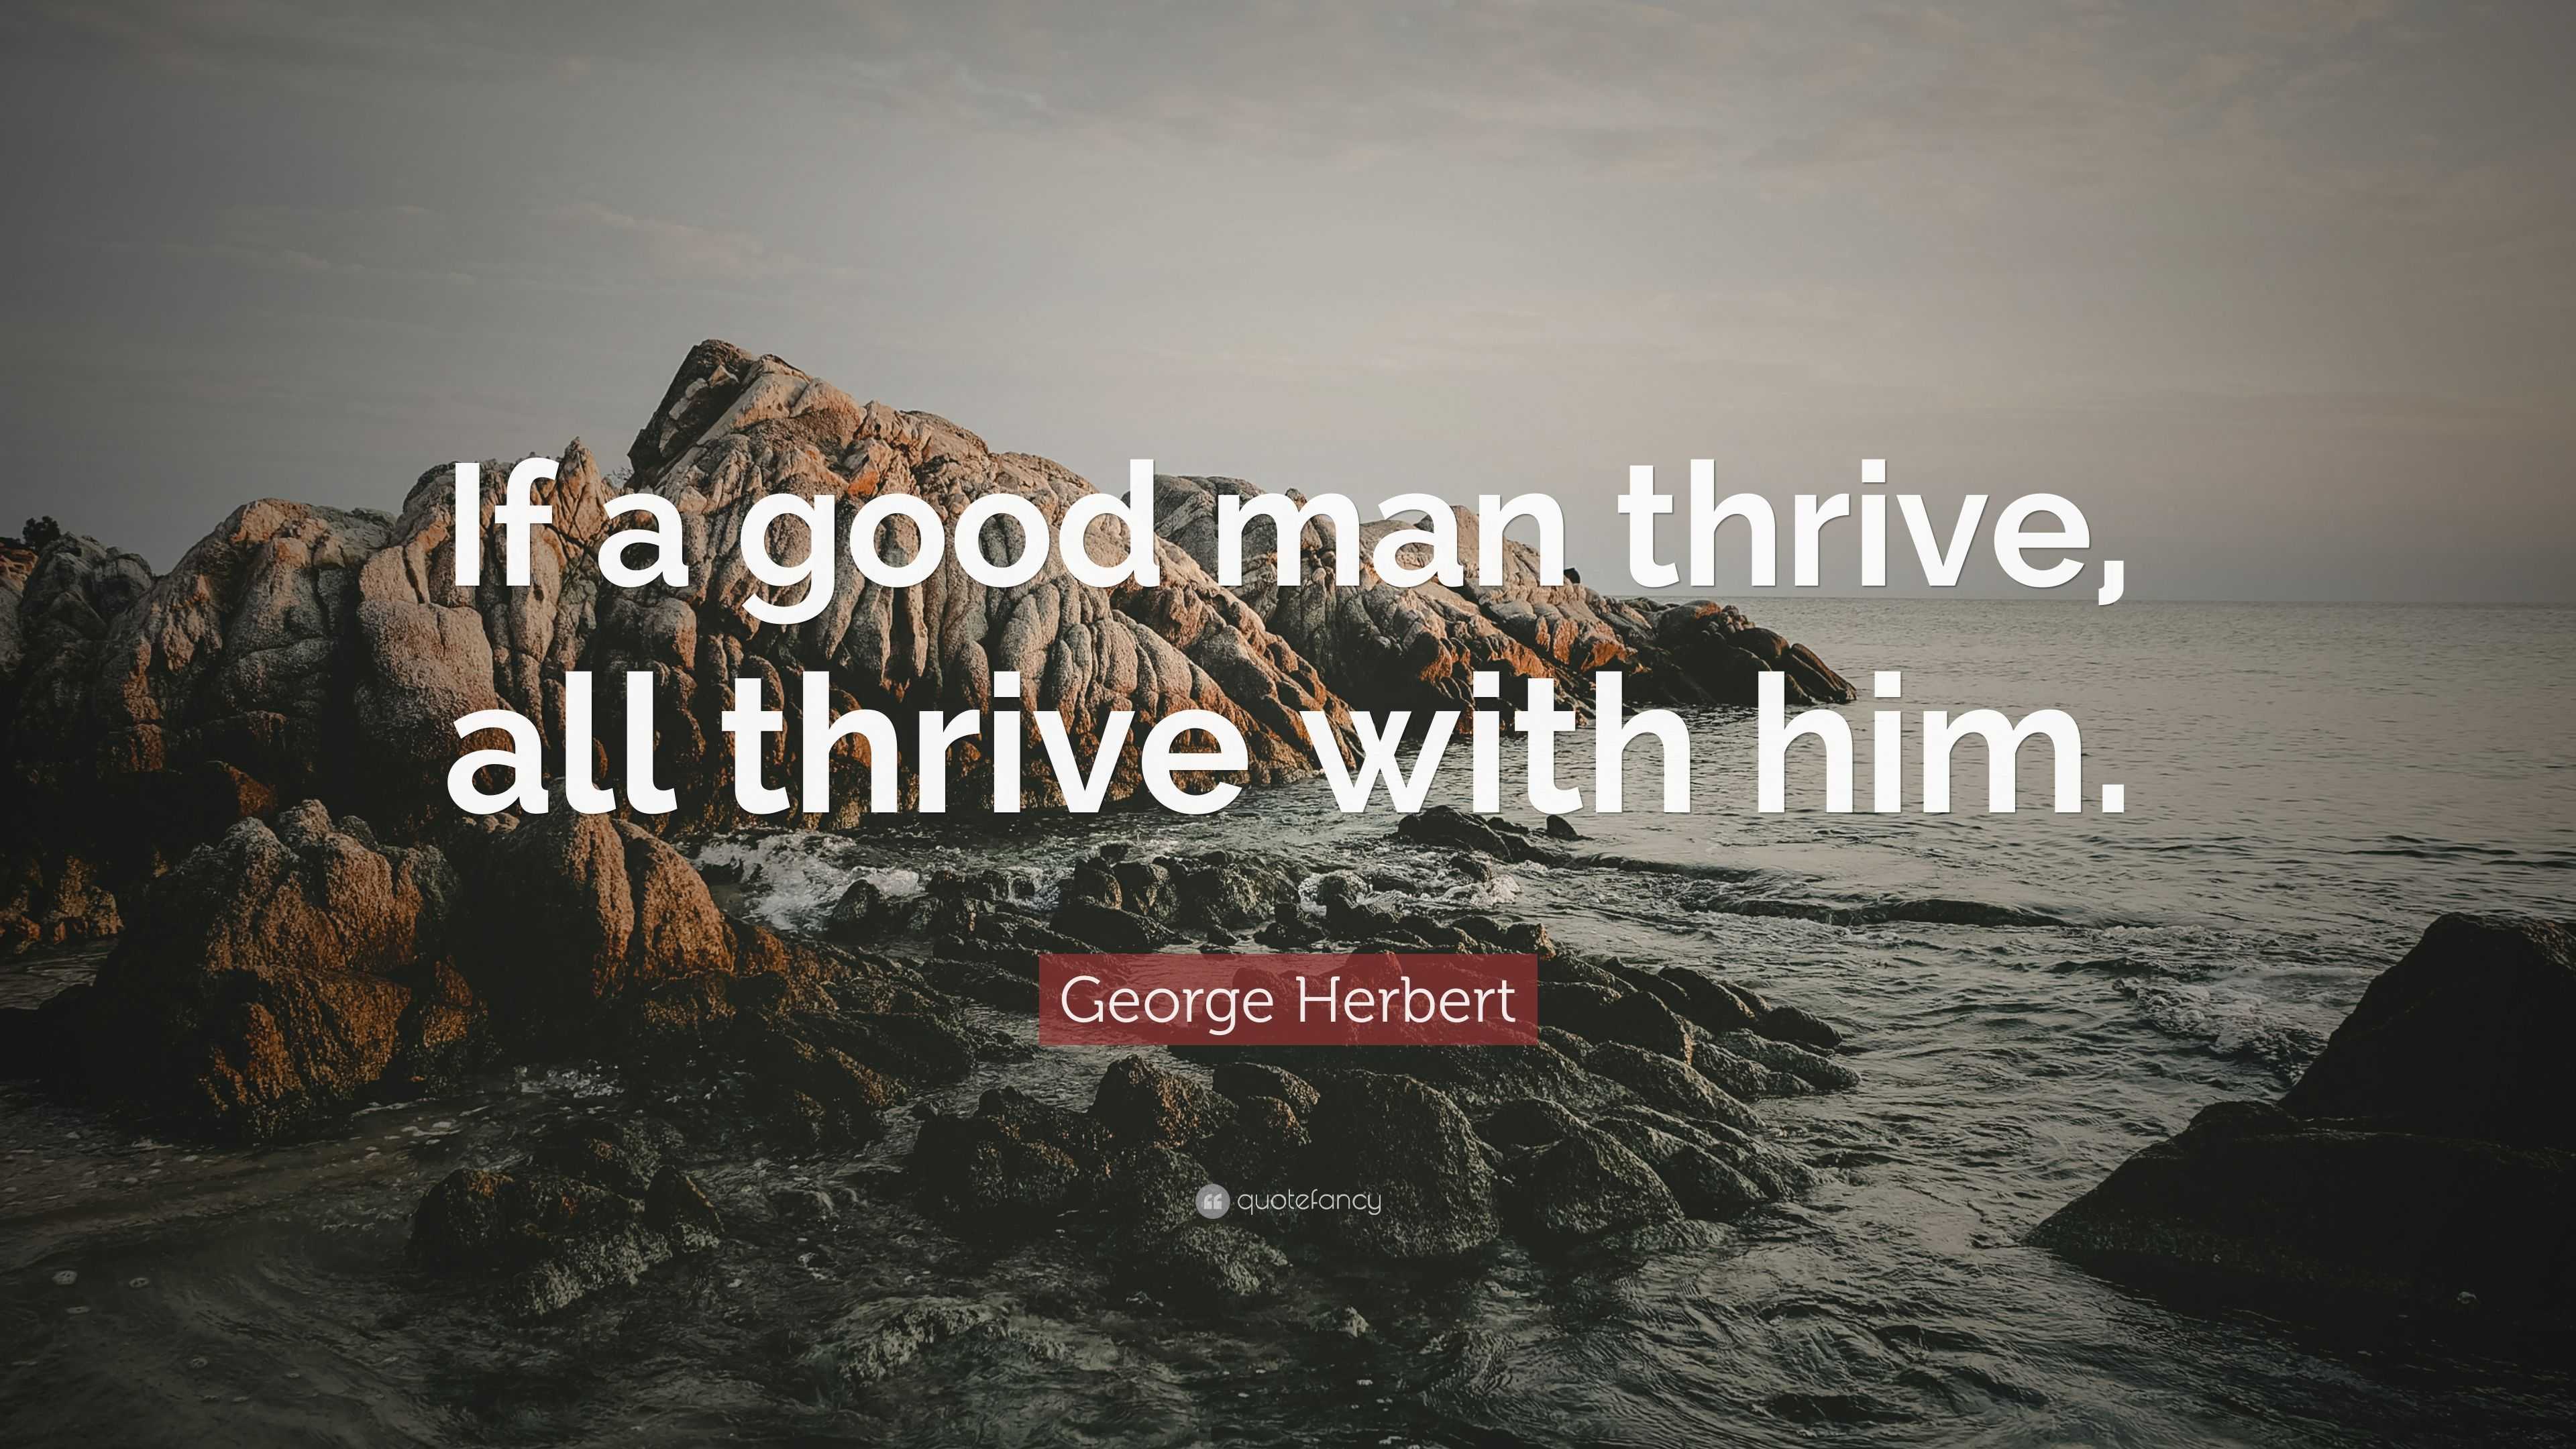 George Herbert Quote: “If a good man thrive, all thrive with him.”